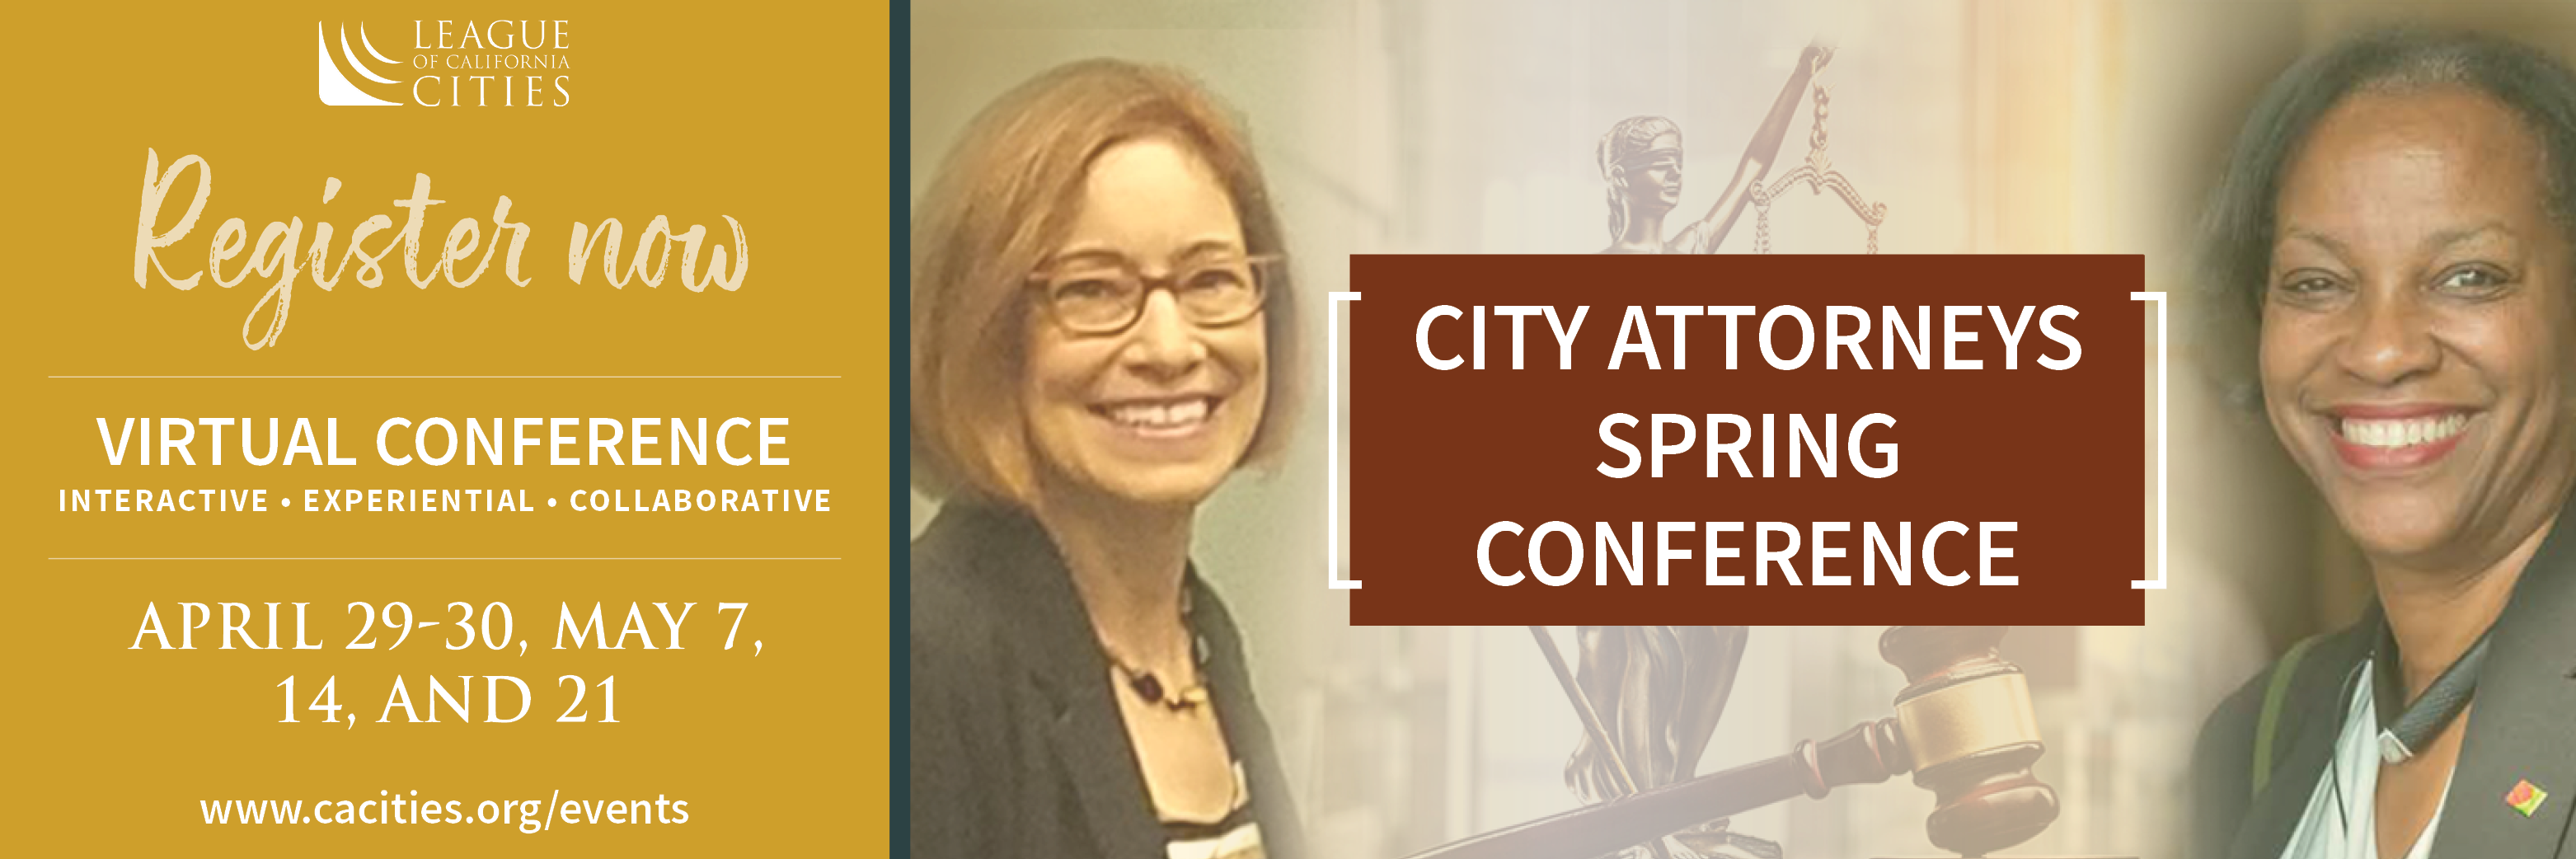 City Attorneys Spring Conference